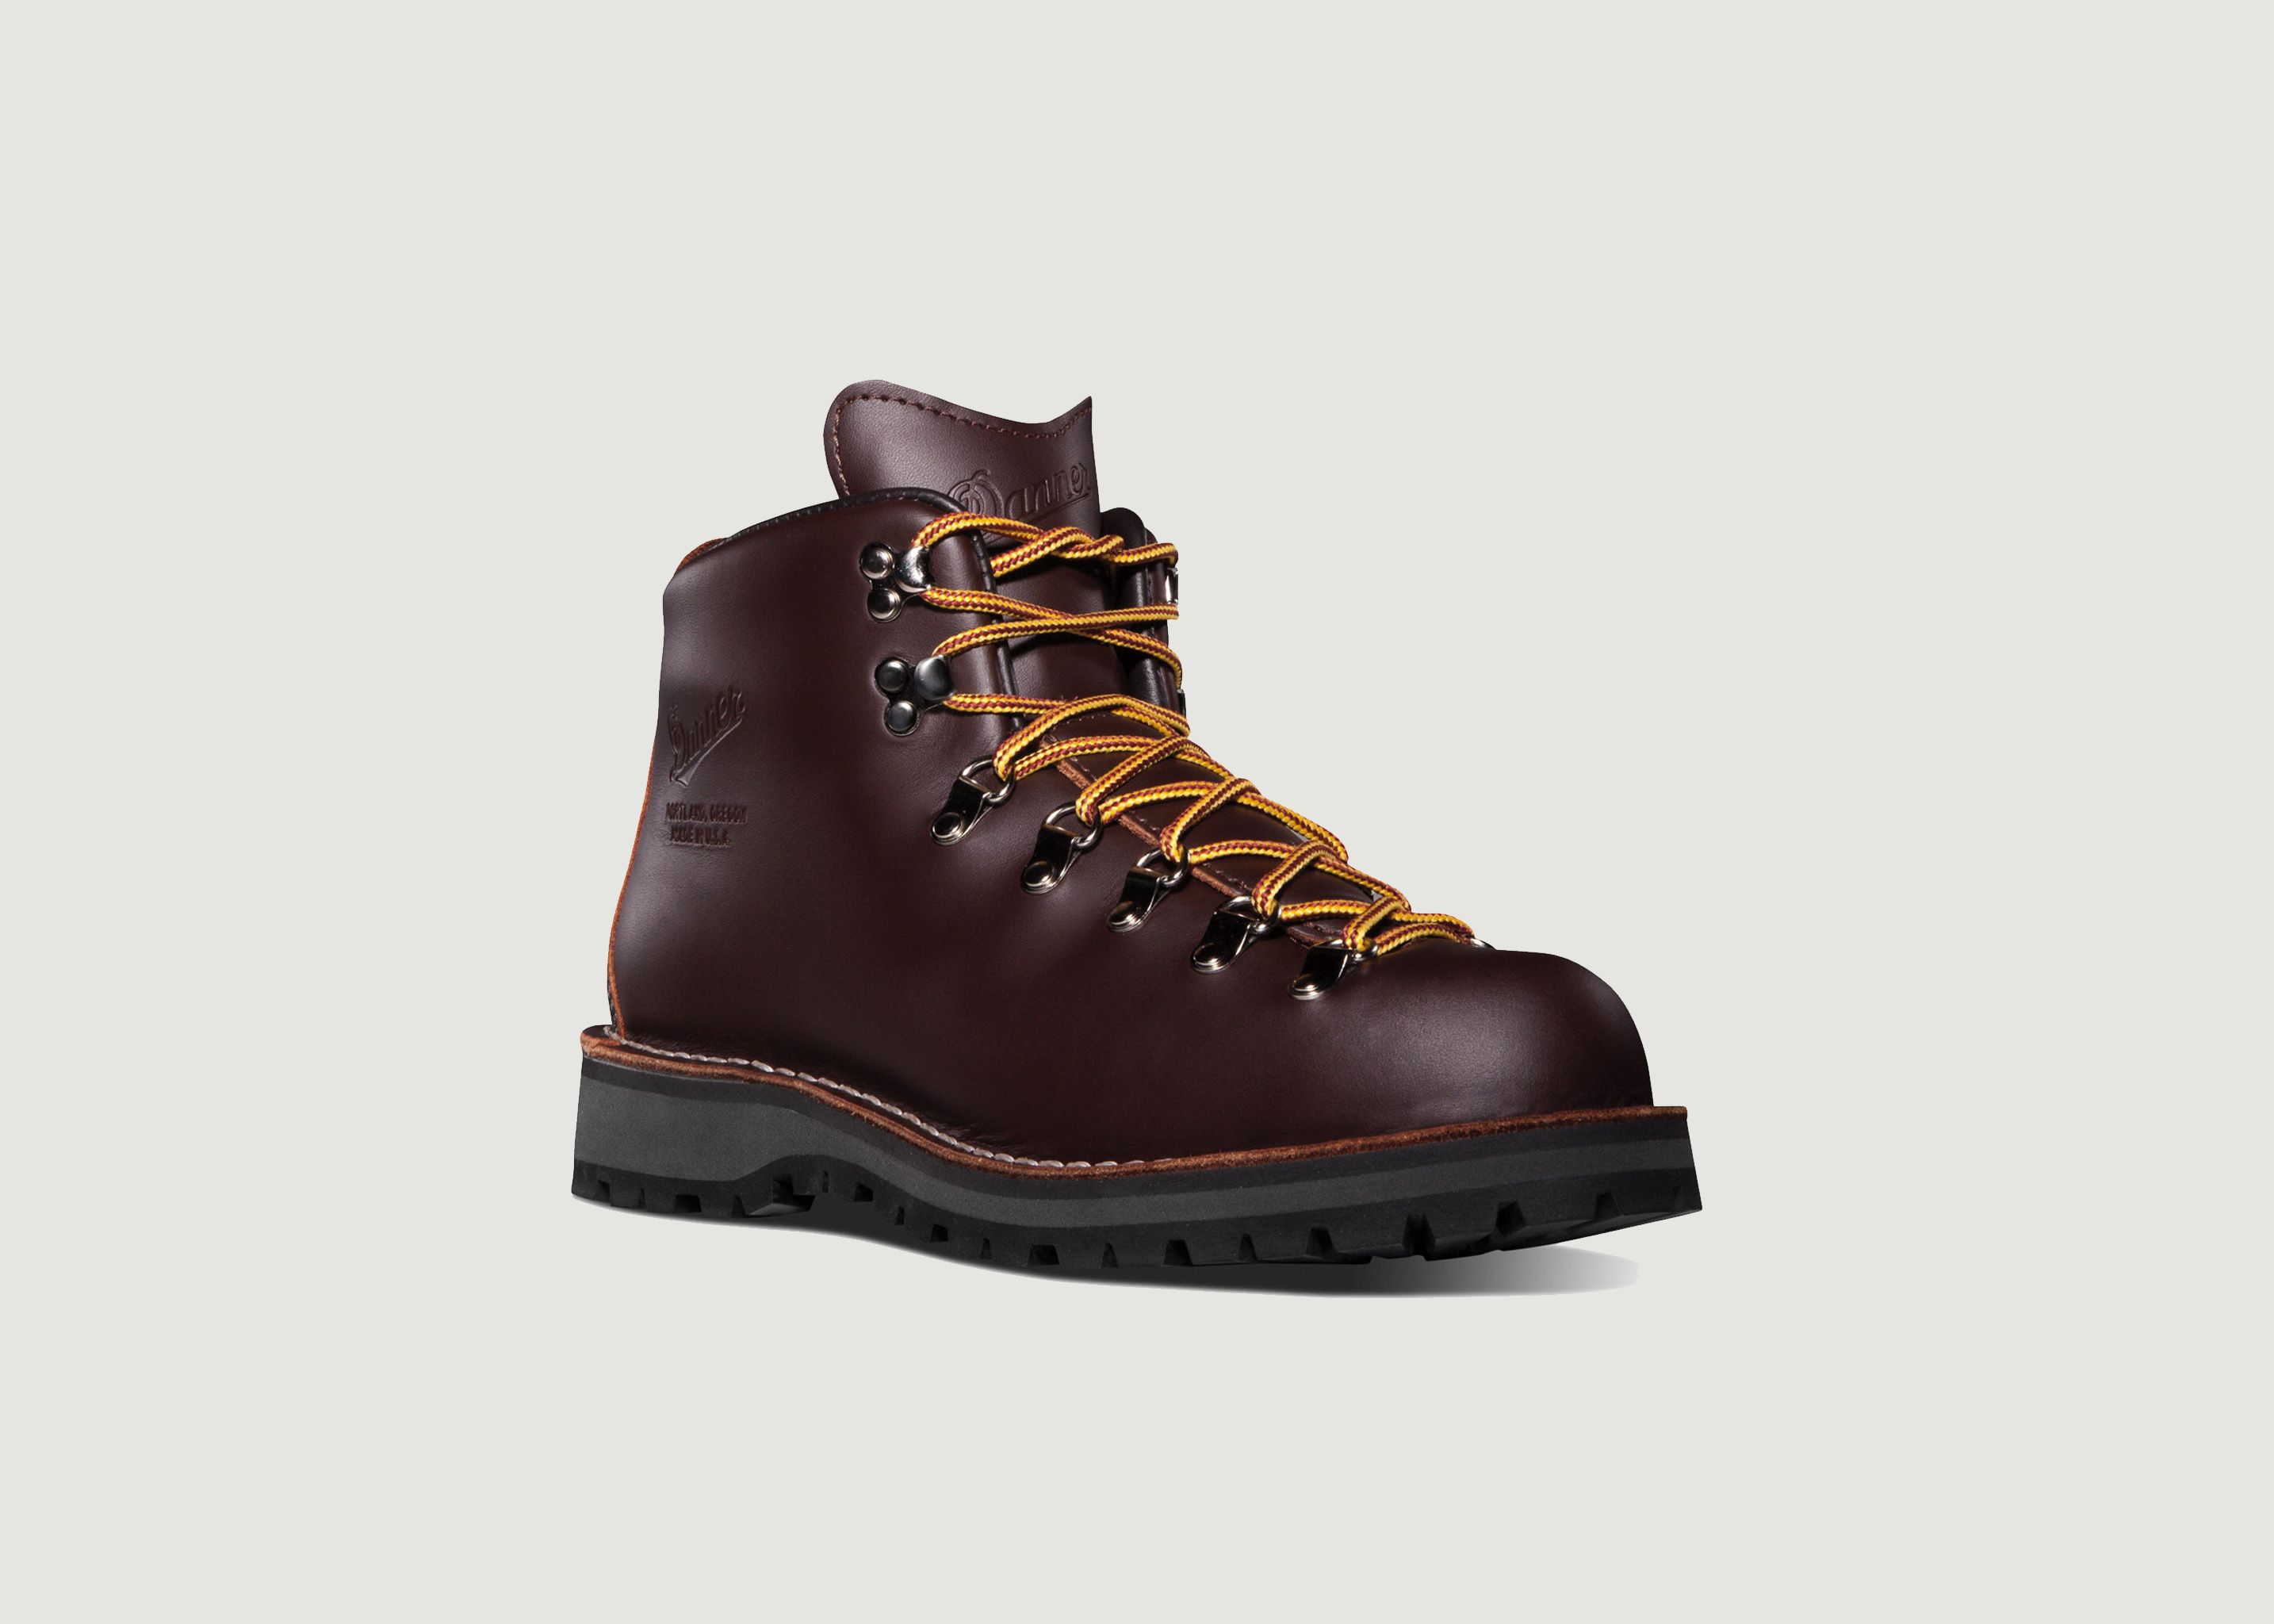 Mountain Light leather boots - Danner